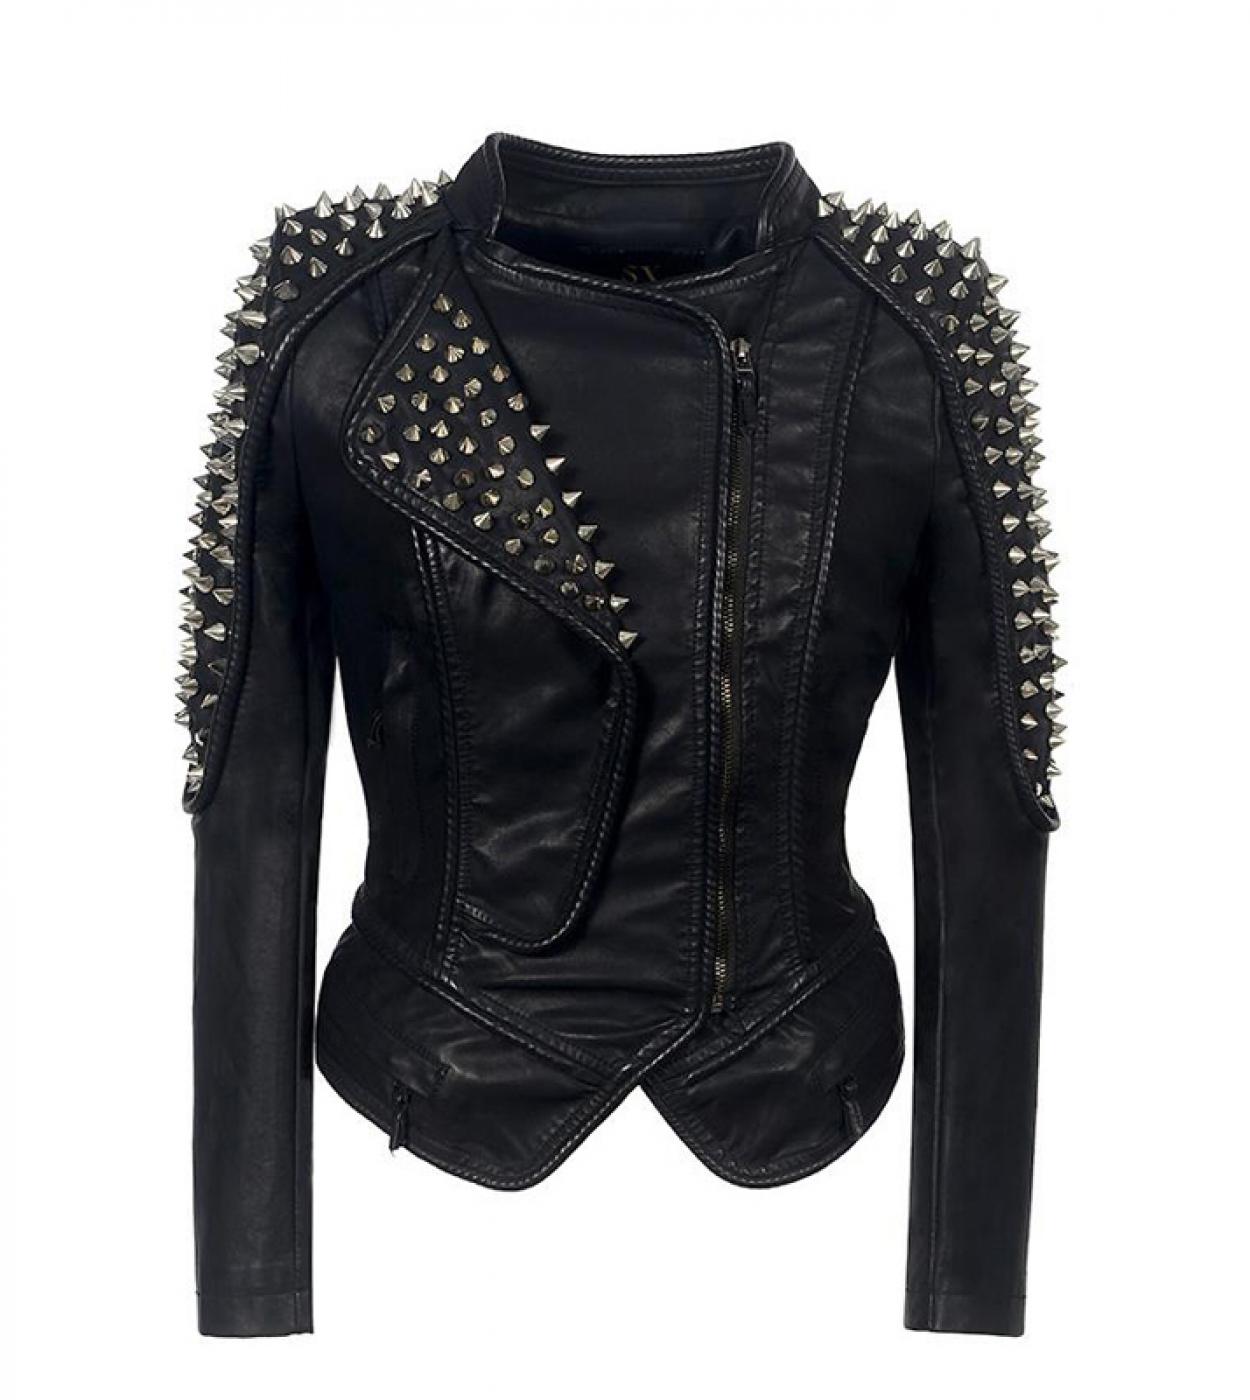 Womens Fashion Studded Perfectly Shaping Faux Leather Biker Jacket,plus Size 6xl Black Punk Rivet Shoulder Jackets For 